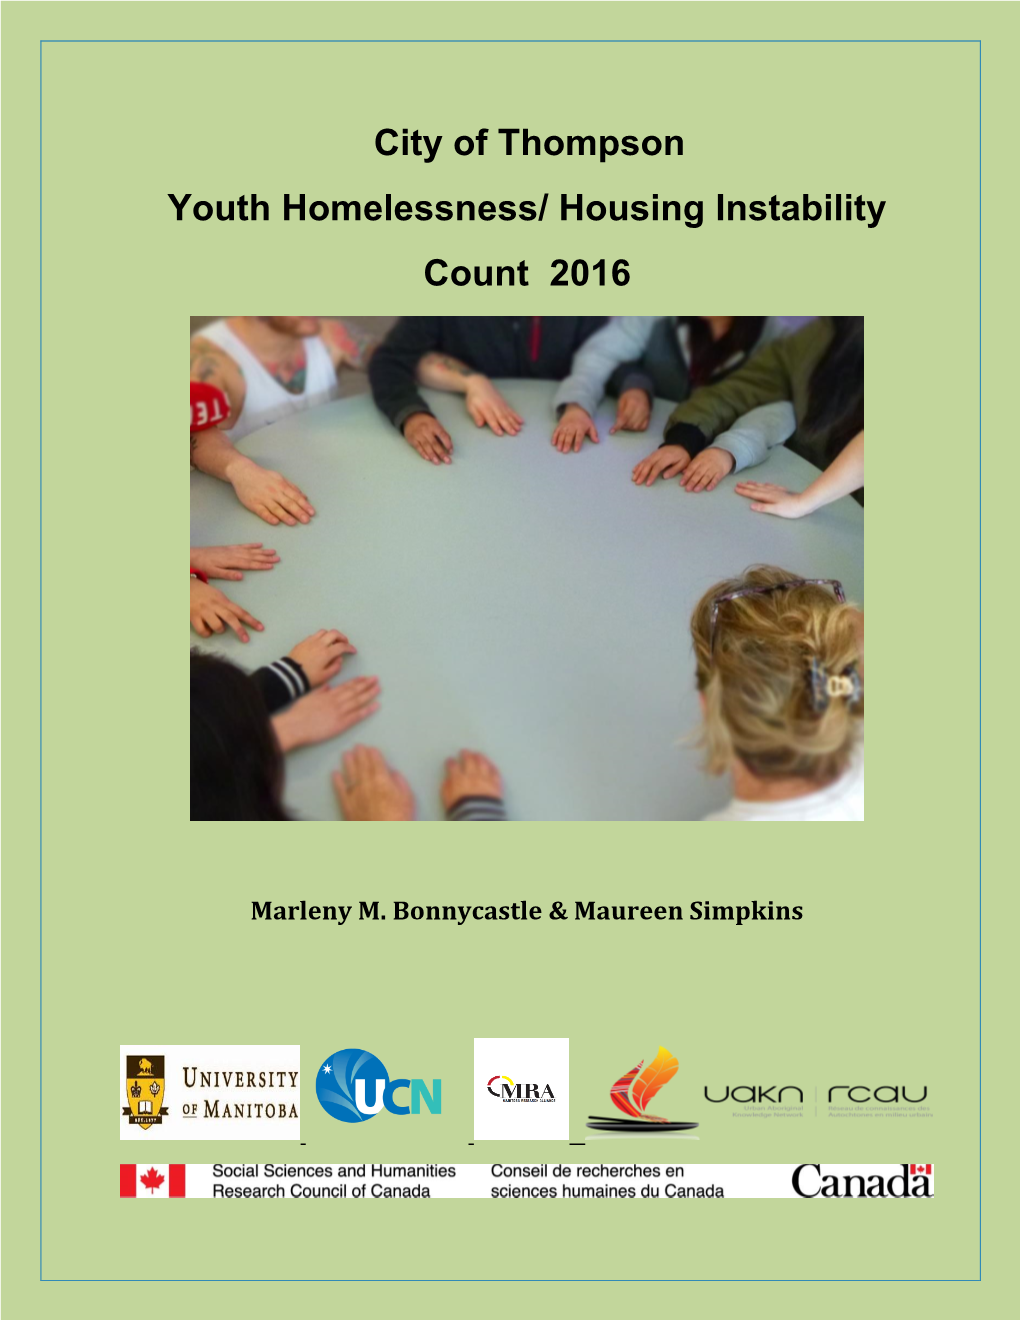 City of Thompson Youth Homelessness/ Housing Instability Count 2016